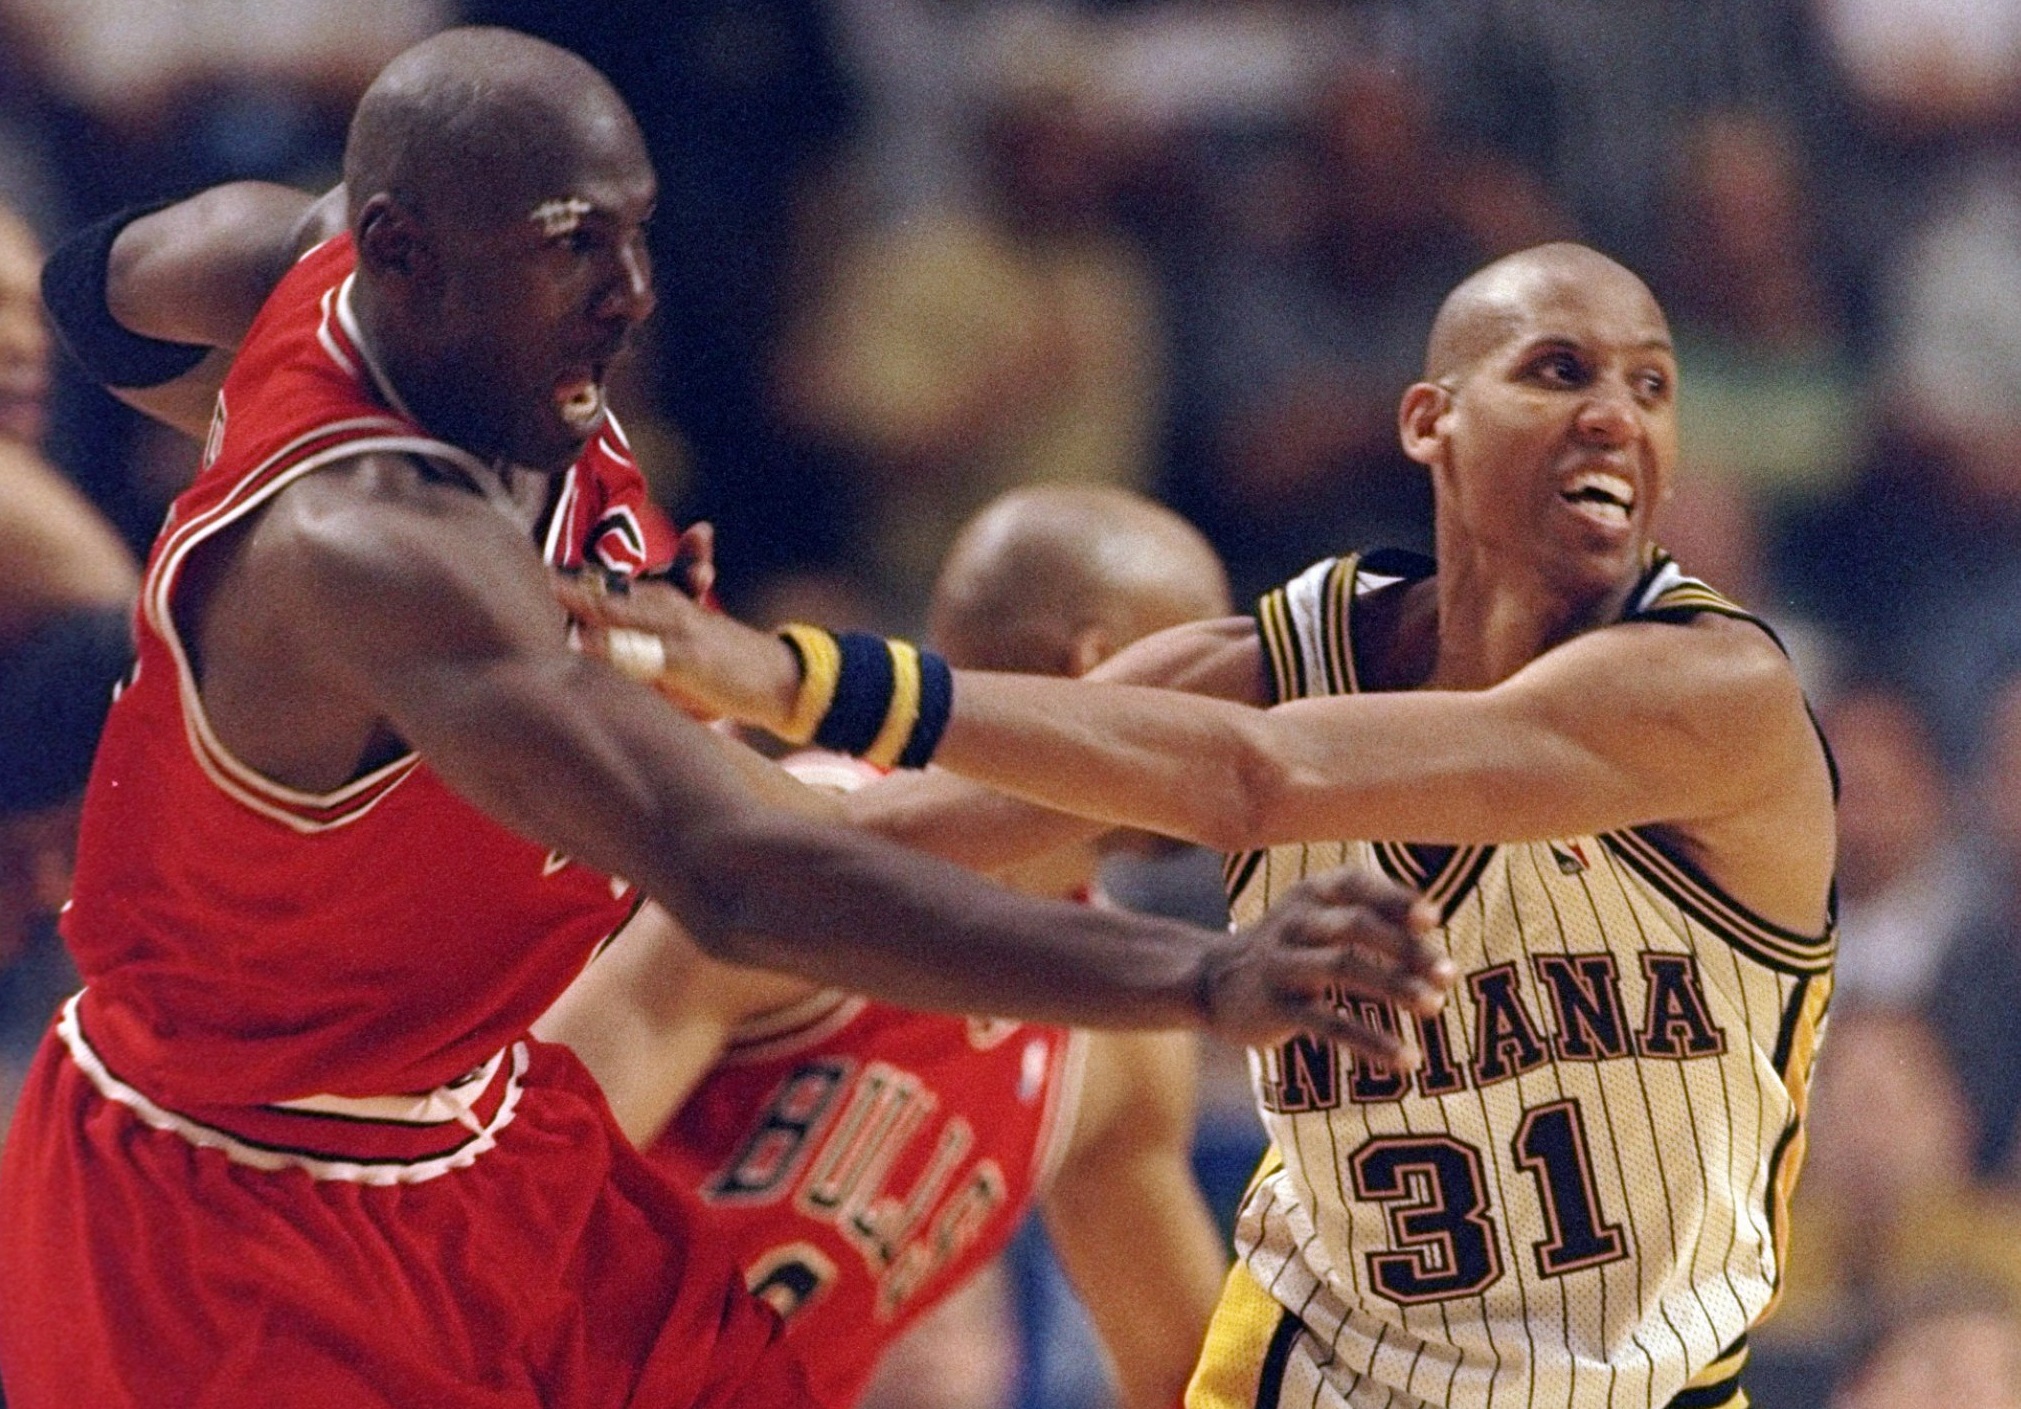 Relive the Pacers vs. Bulls 1998 